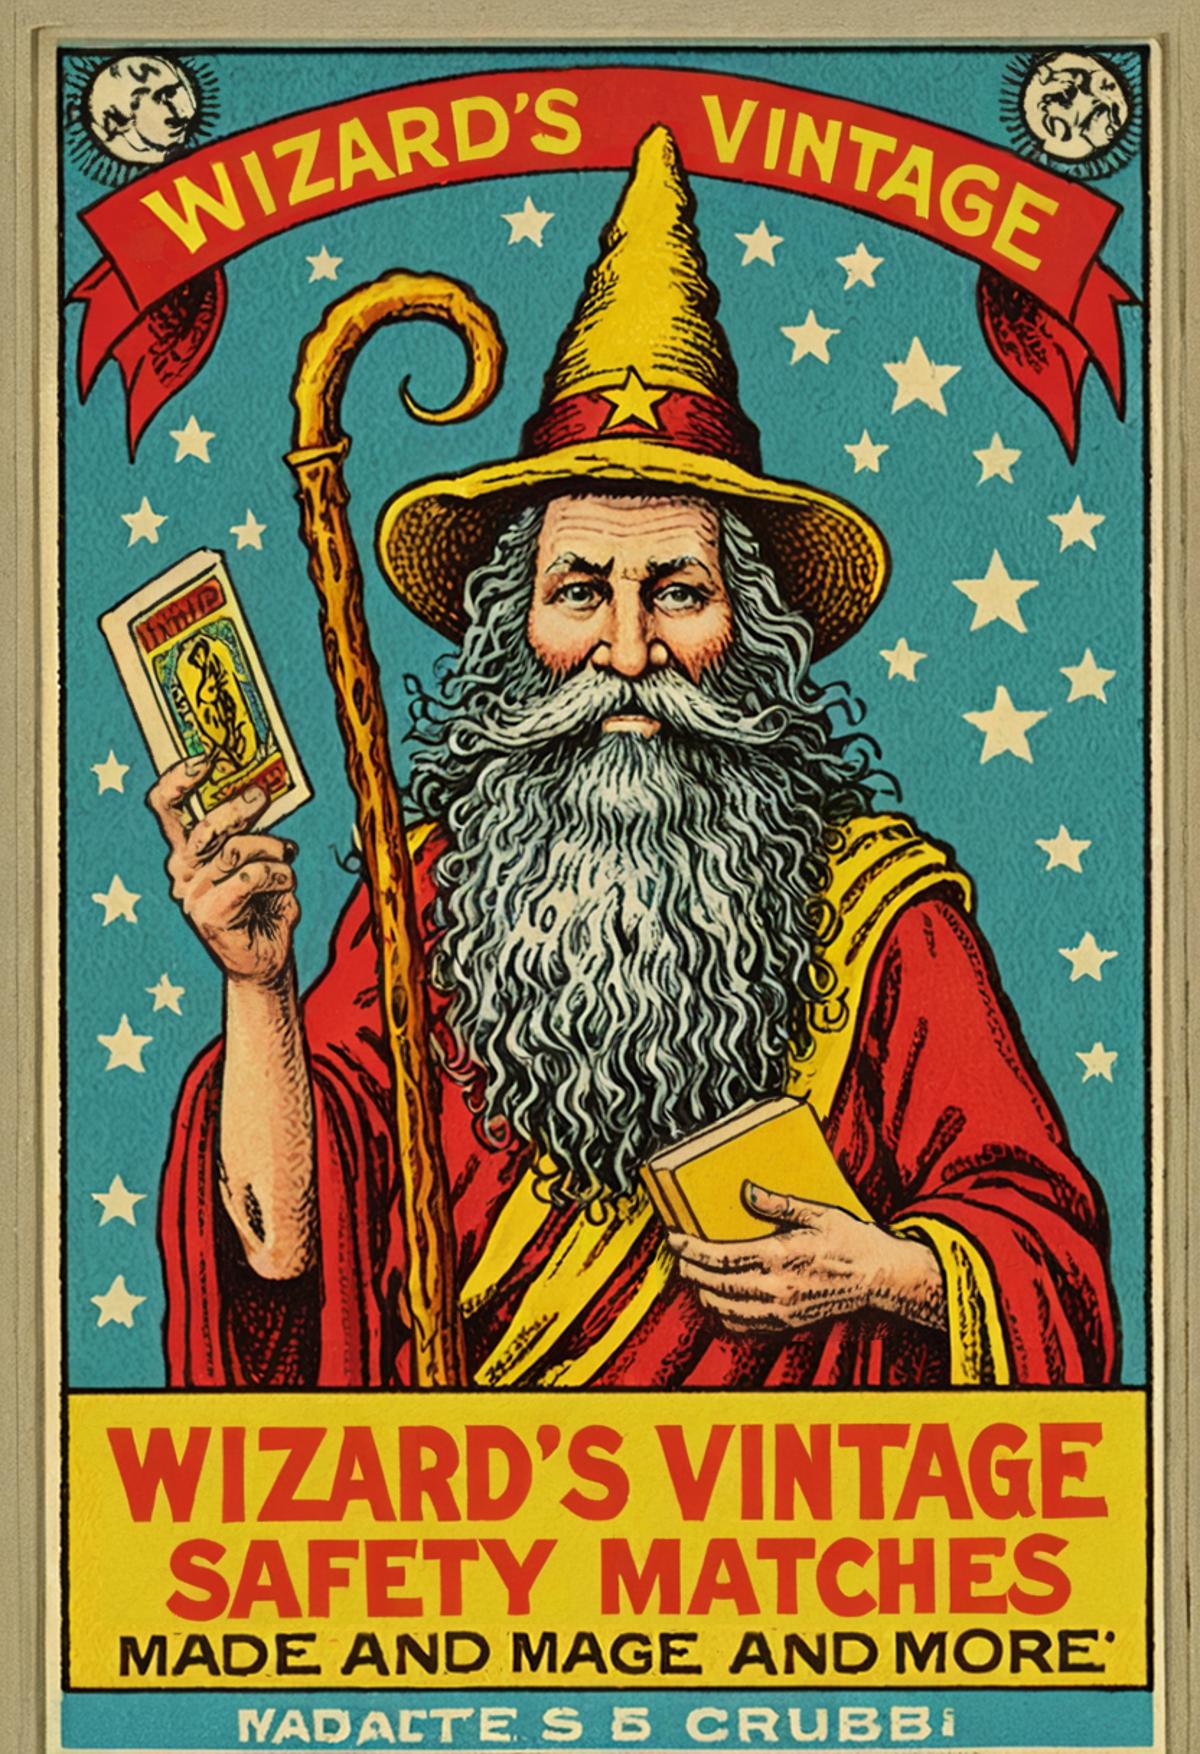 vintage safety matches open matchbox (called "Wizard's Vintage":1.4), illustration of moondog wizard whitebeard by r crumb...